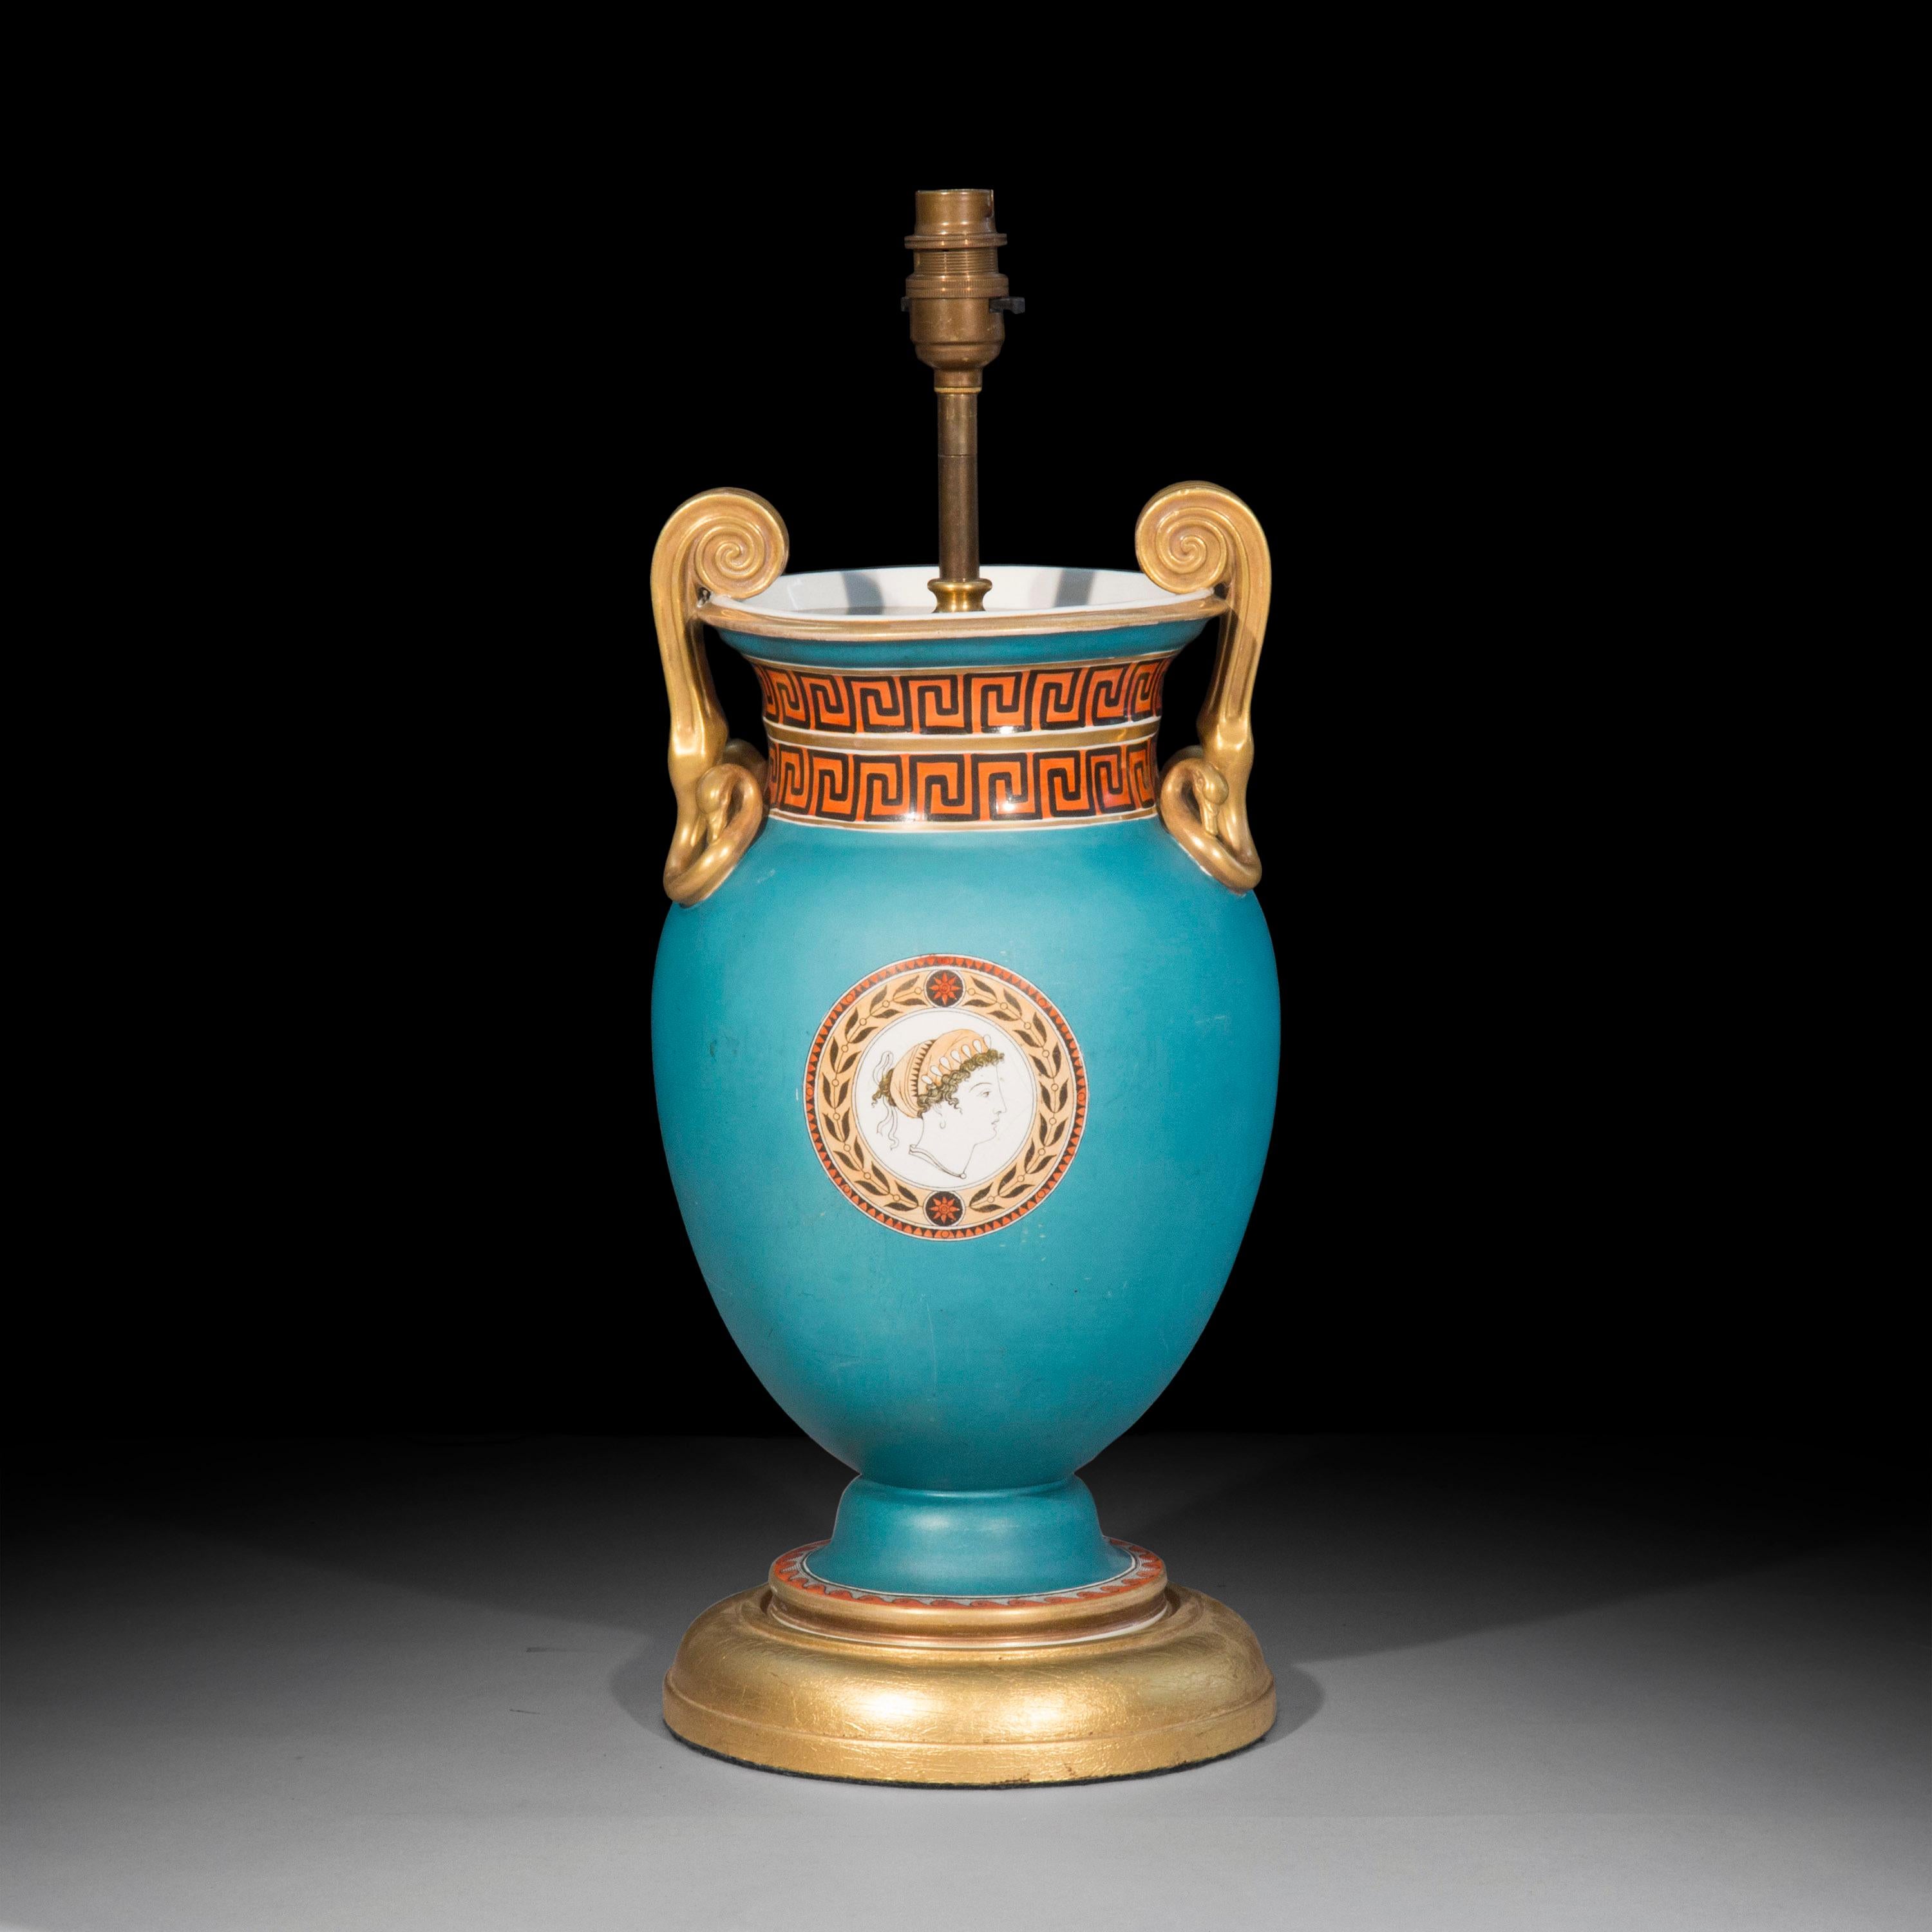 A very decorative Grand Tour vase after a design by Thomas Hope, mounted as table lamp, in porcelain with matte turquoise ground and glazed classical ornaments. English, early 19th century.

Why we like it
An impossibly chic, intricately detailed